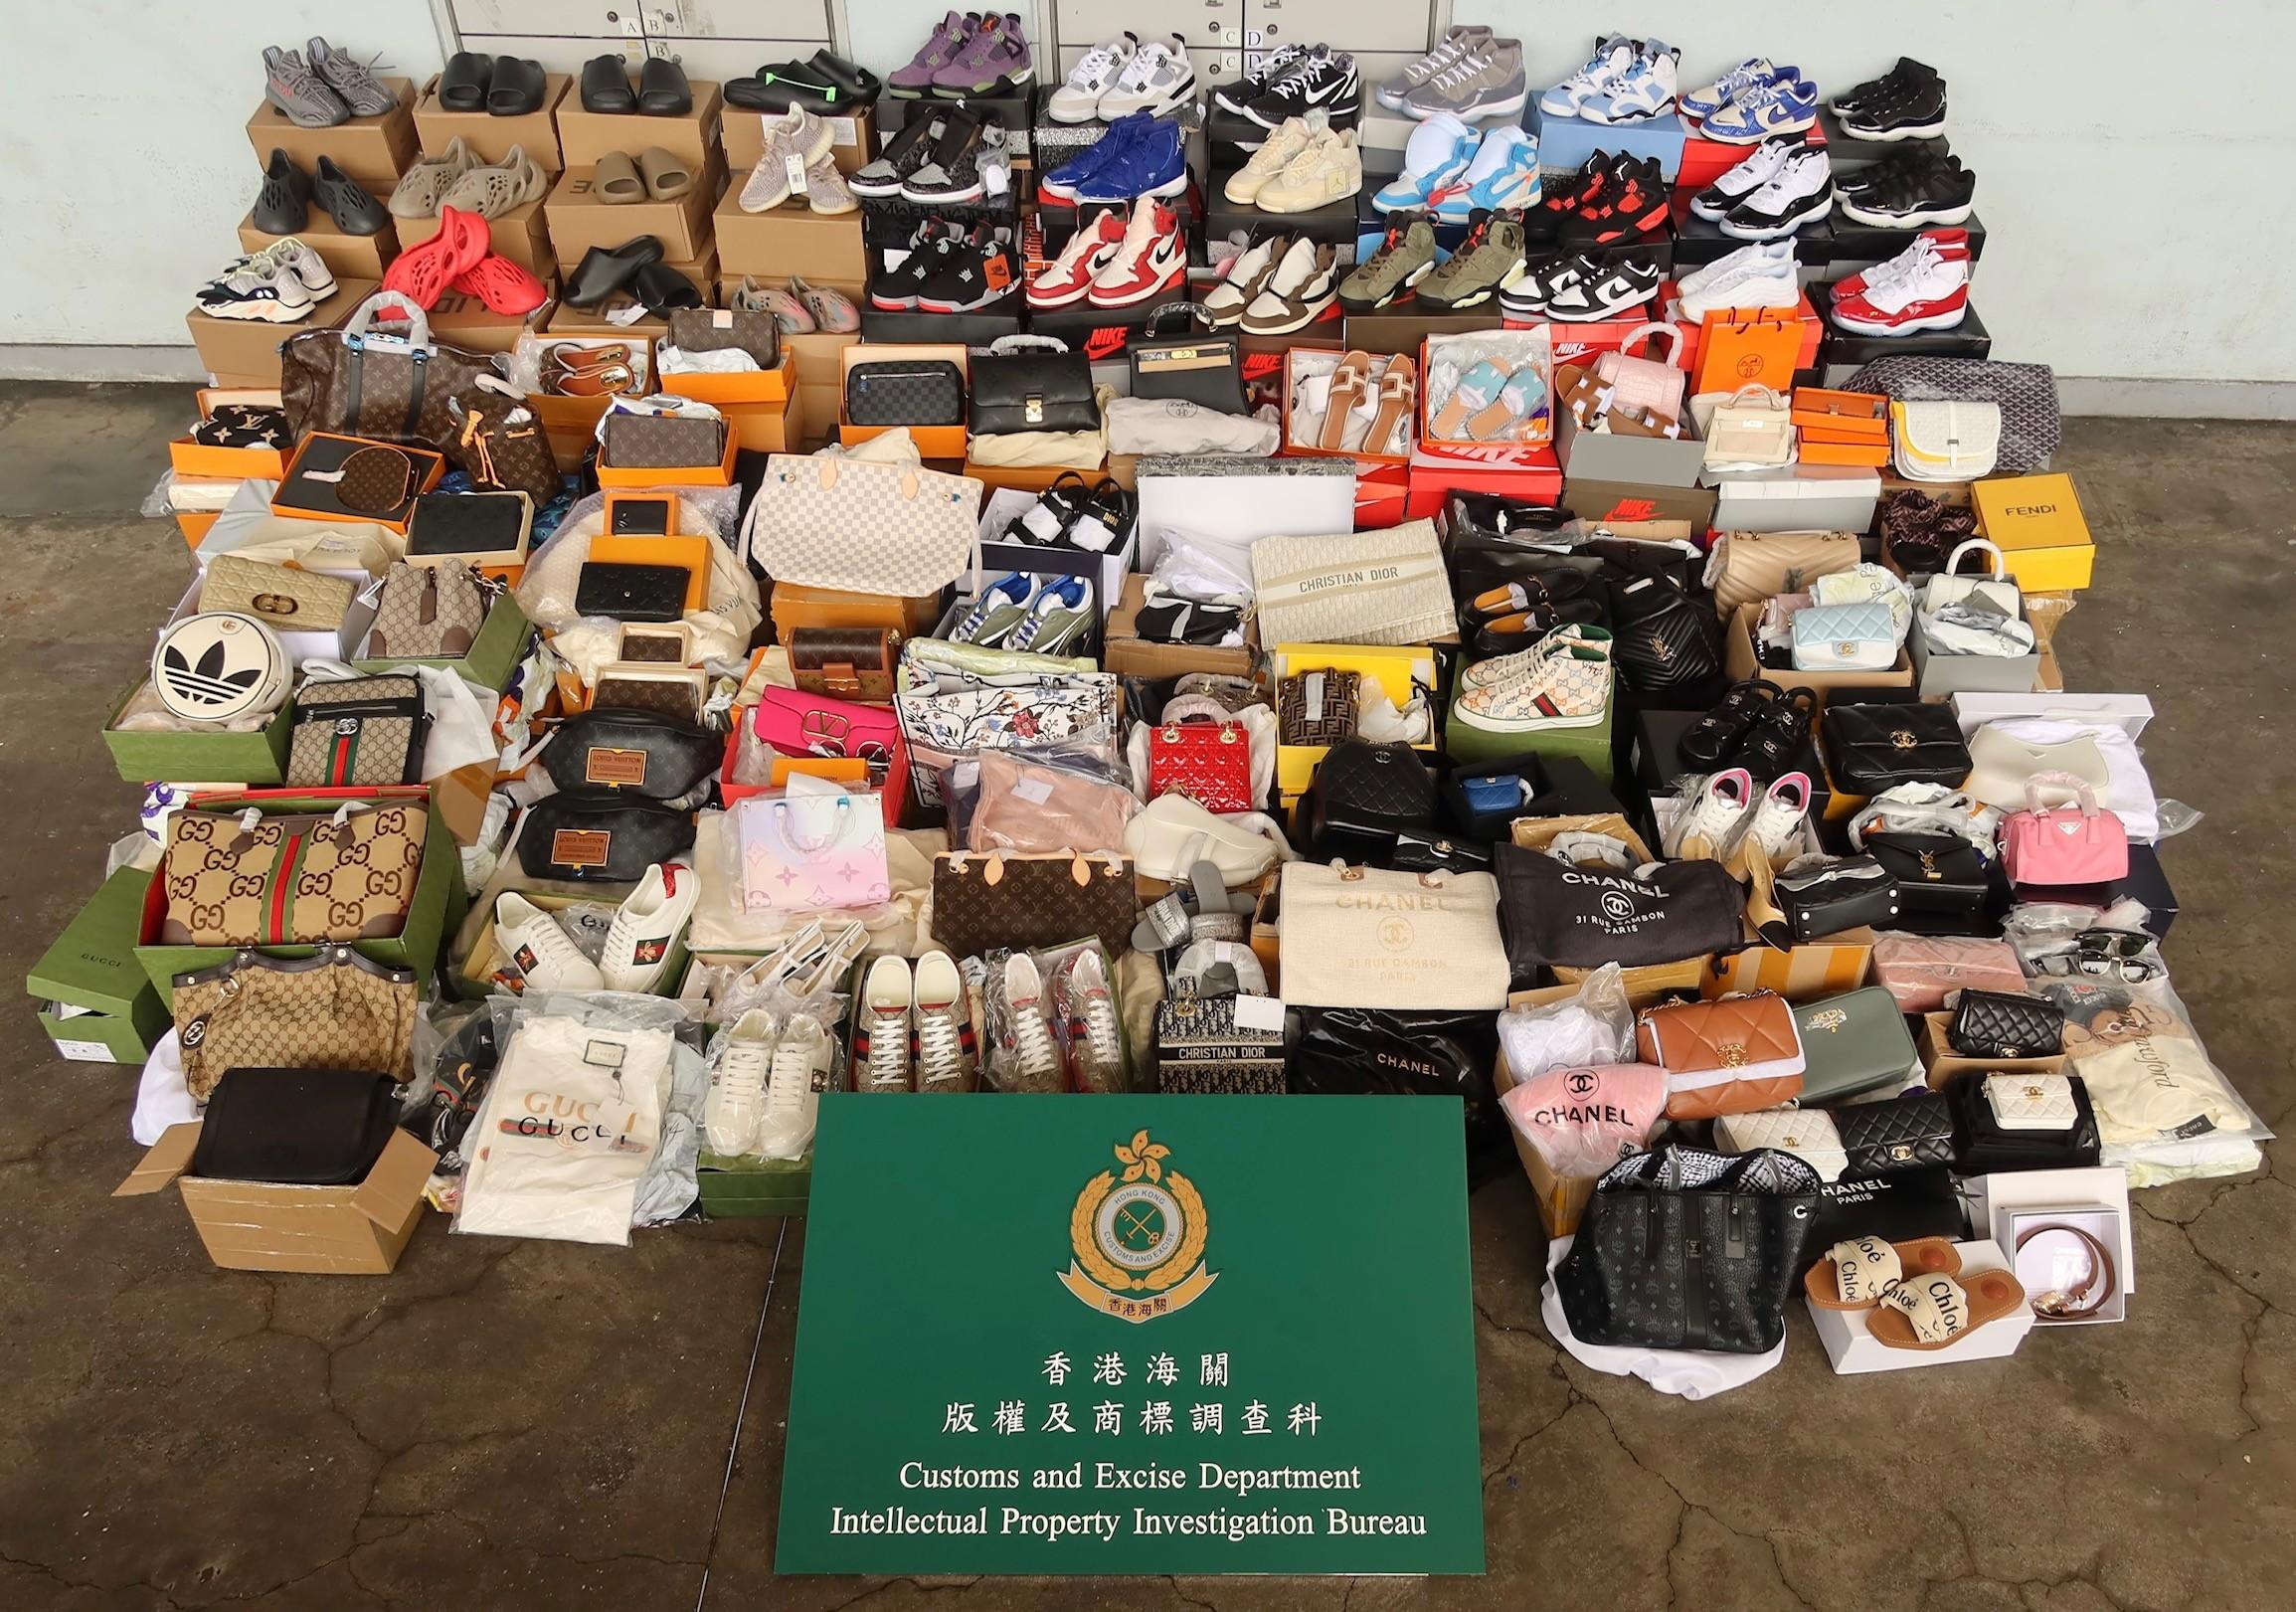 Hong Kong Customs seized about 2 800 items of suspected counterfeit goods with a total estimated market value of about $4.1 million at Man Kam To Control Point, Yuen Long and Kwai Chung from July 5 to 8. Photo shows some of the suspected counterfeit goods seized by Customs officers at Man Kam To Control Point.